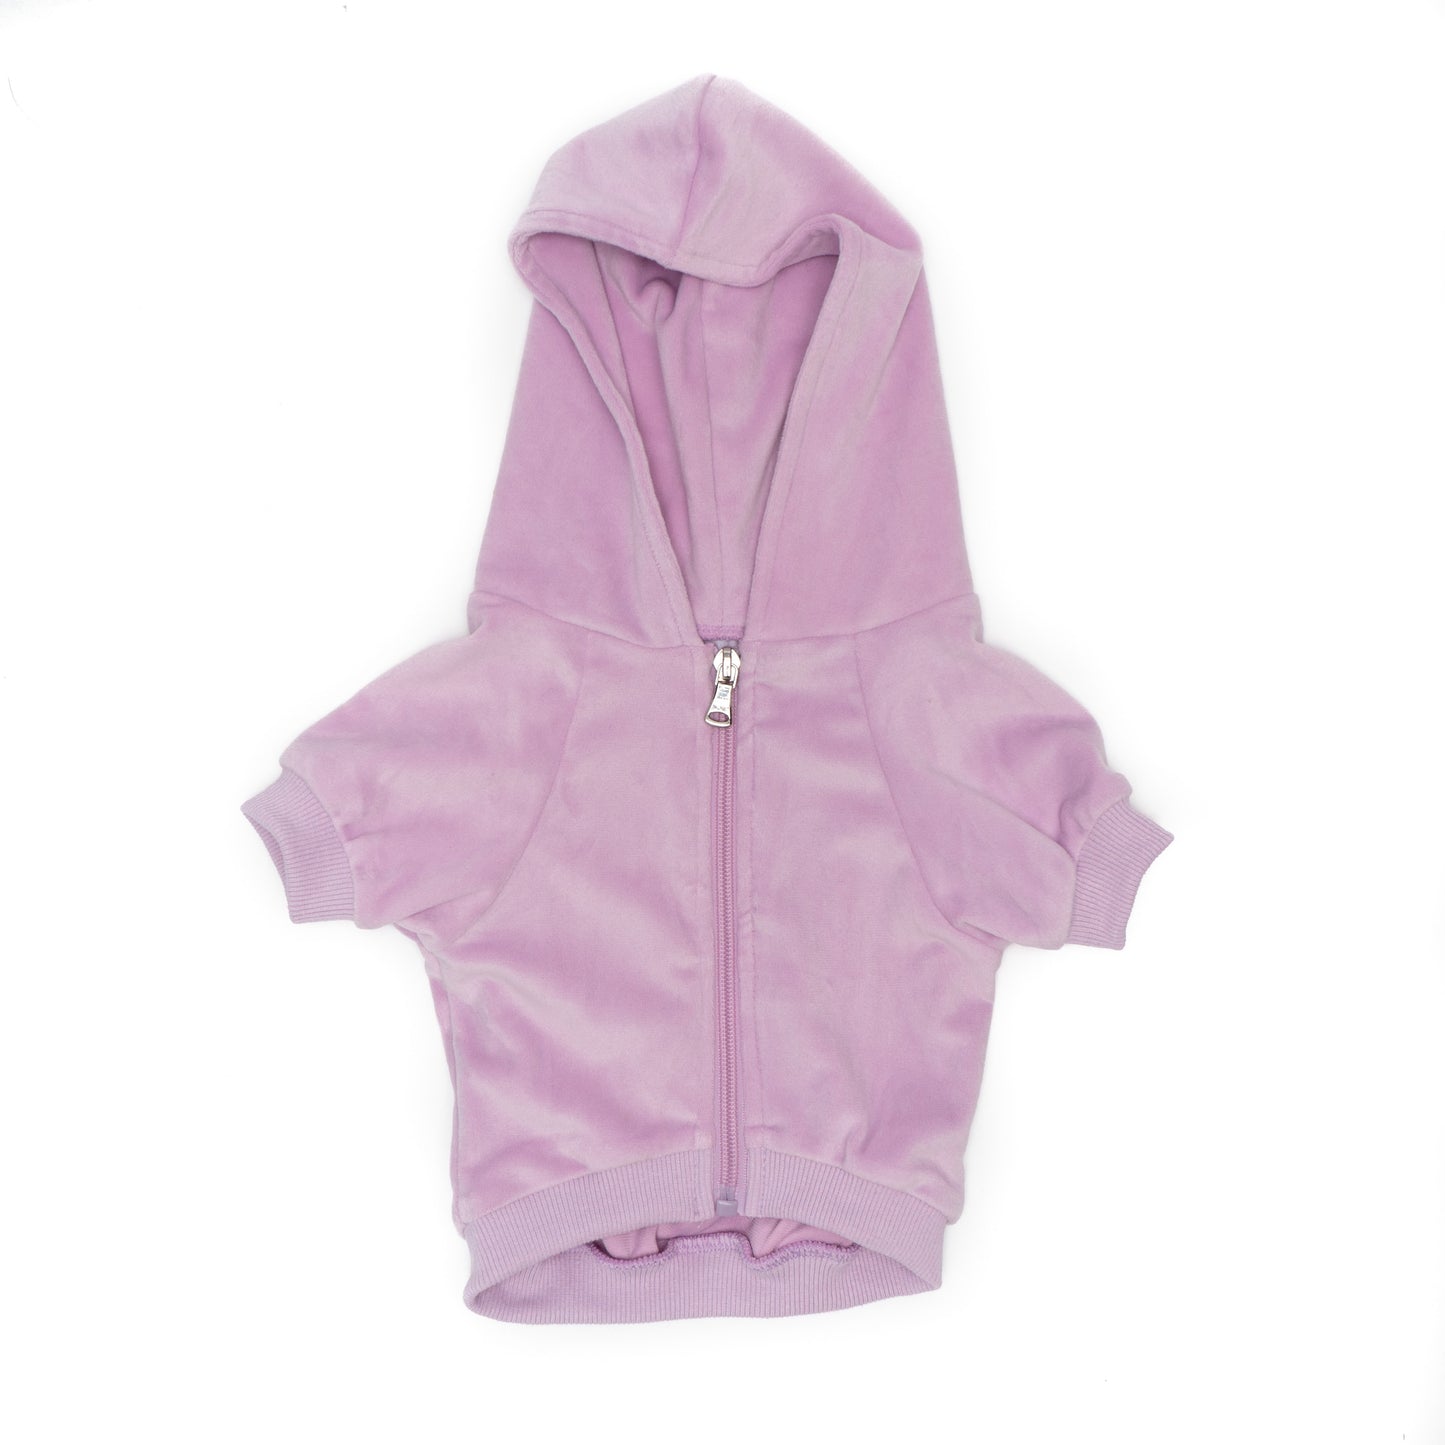 The Lilac Velour Hoodie